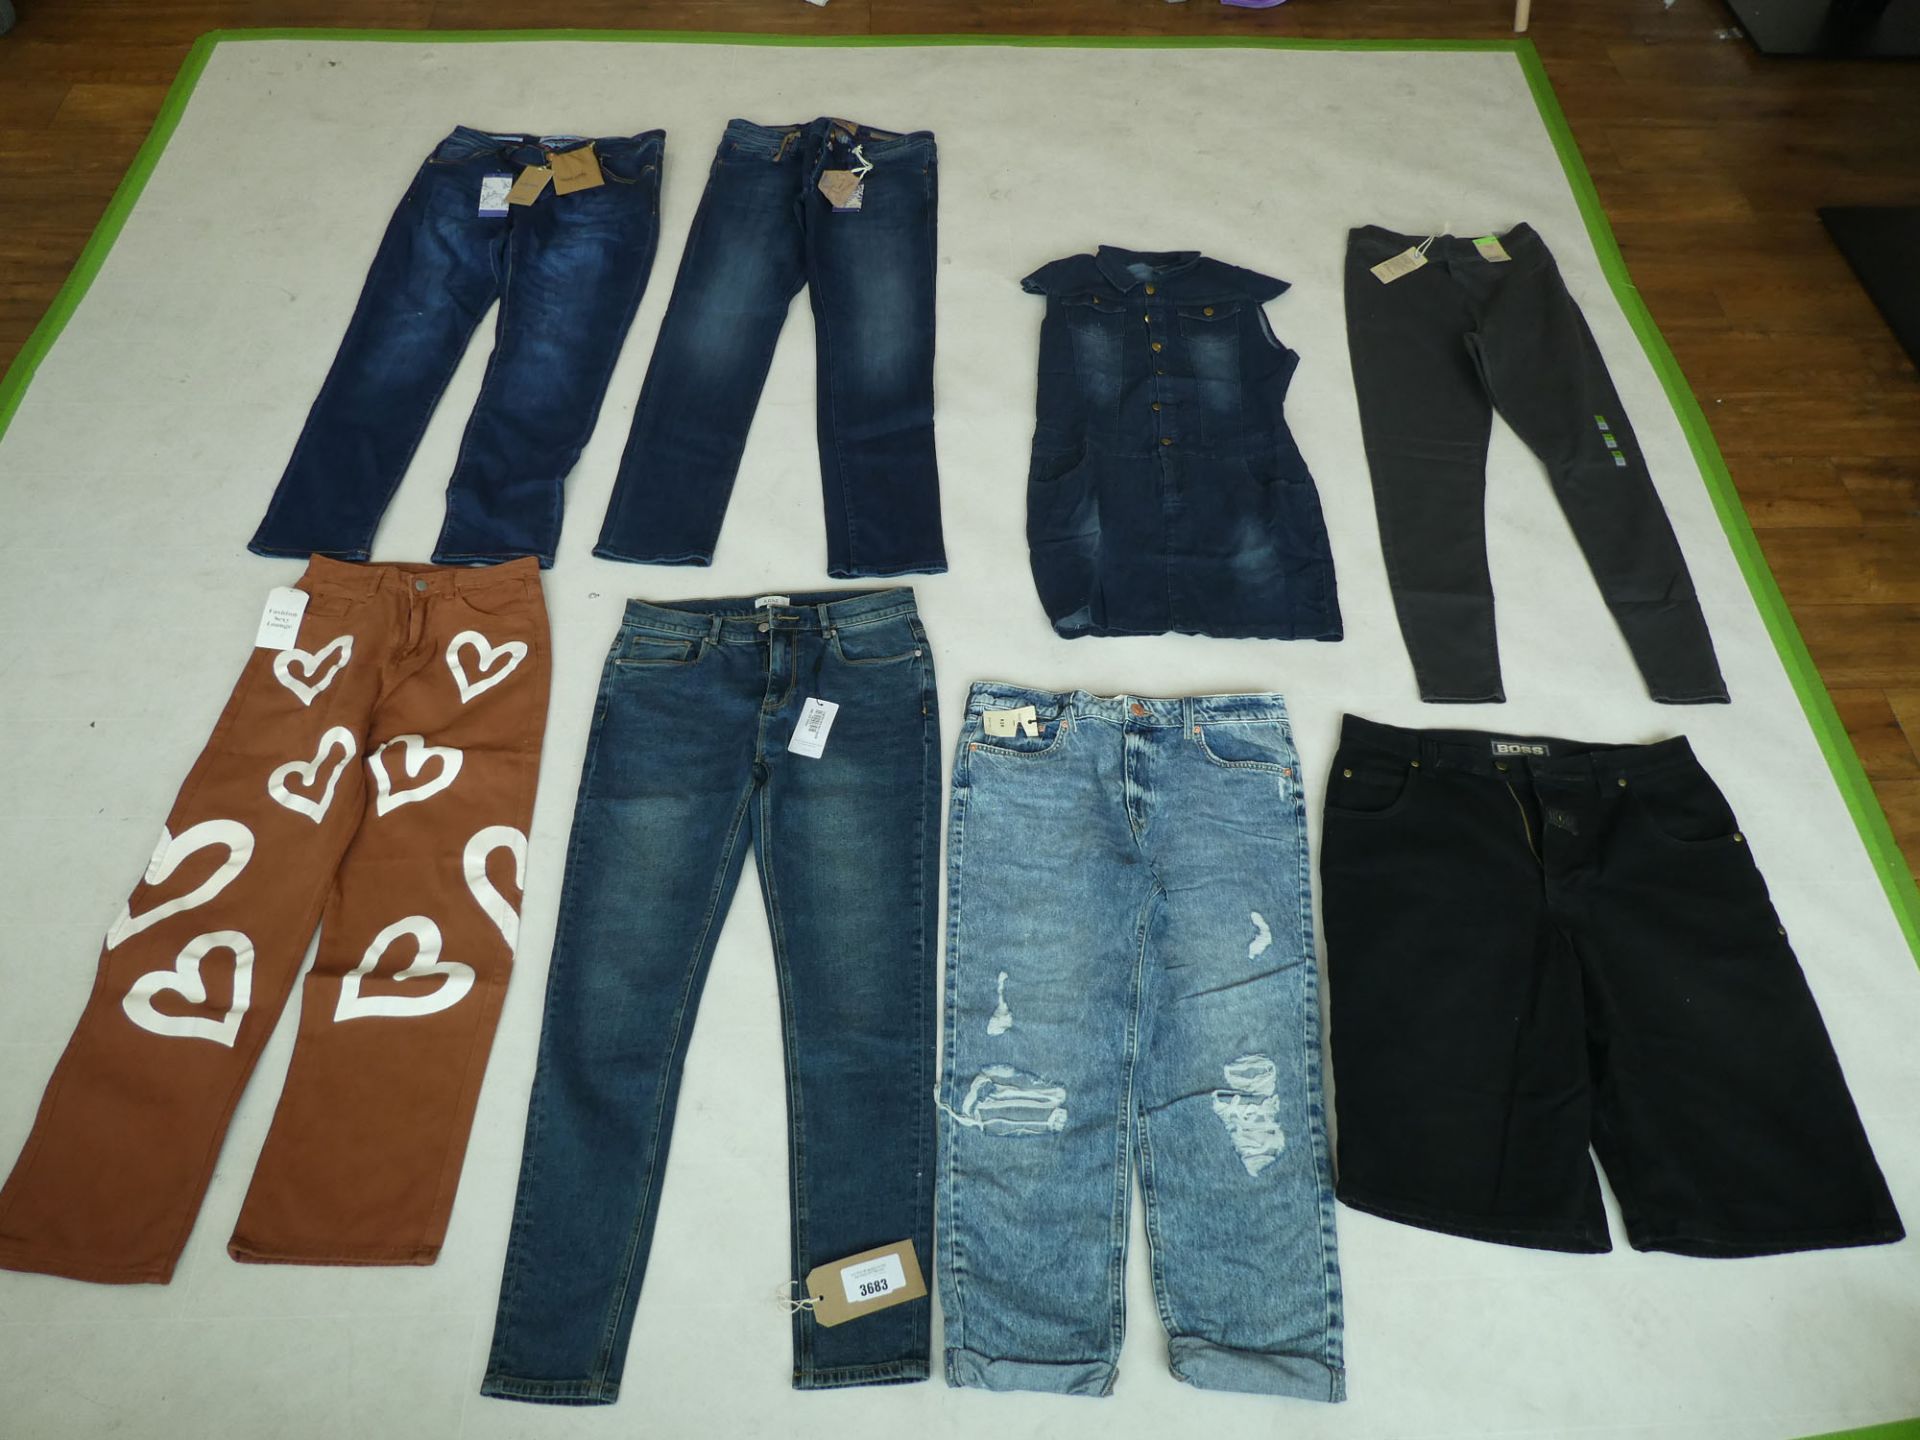 Selection of denim wear to include Jacob Cohen, Boss, Arne, River Island, etc